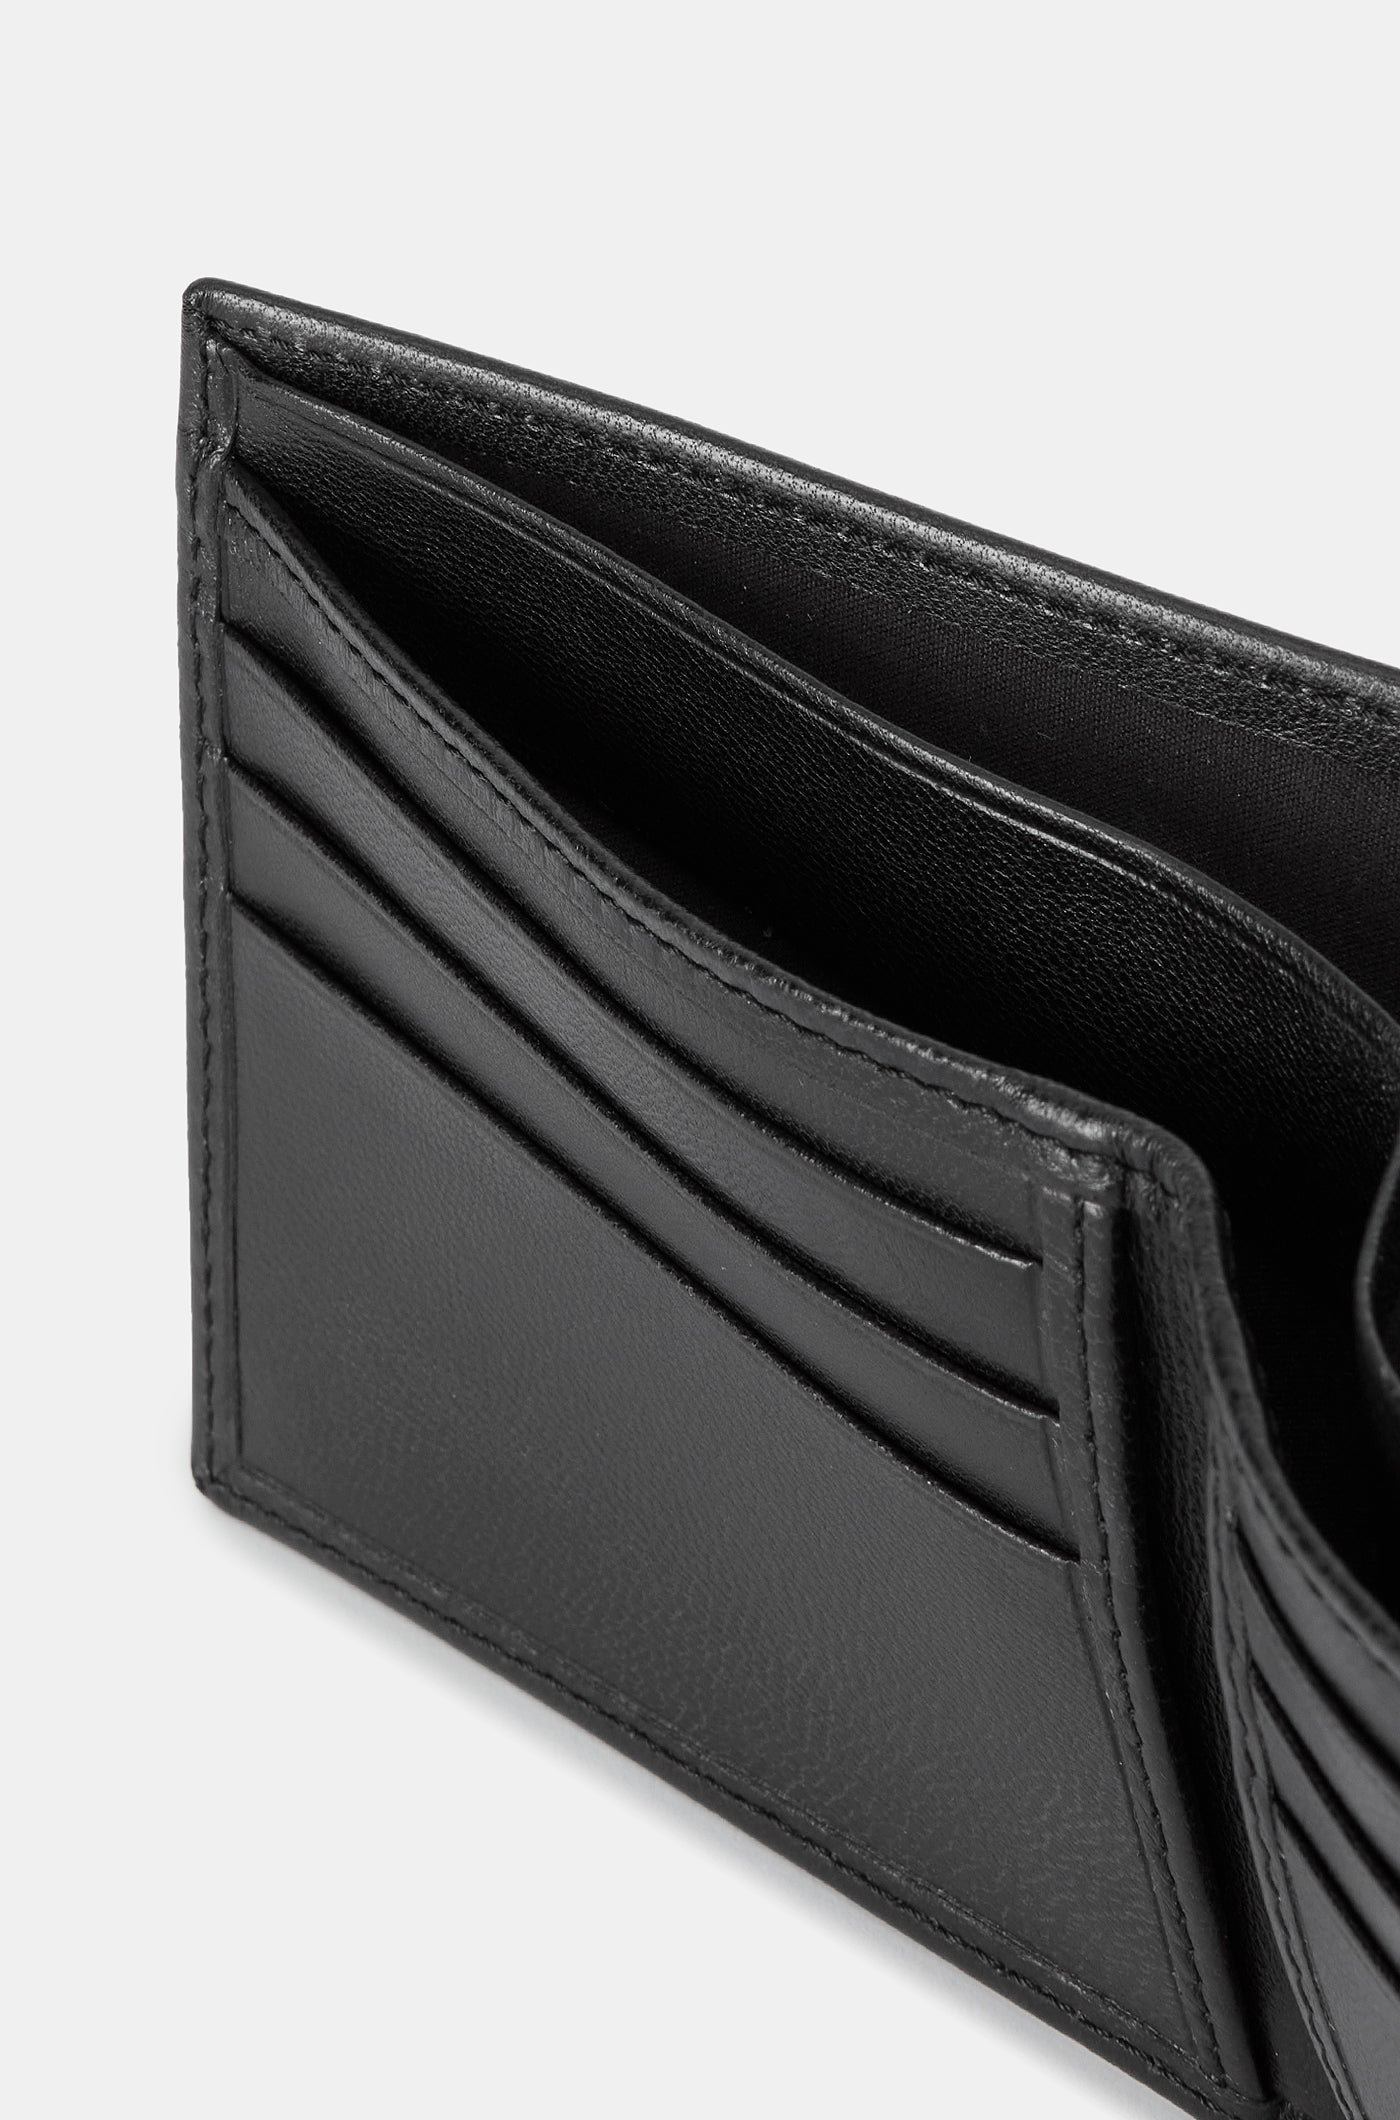 The Club Wallet